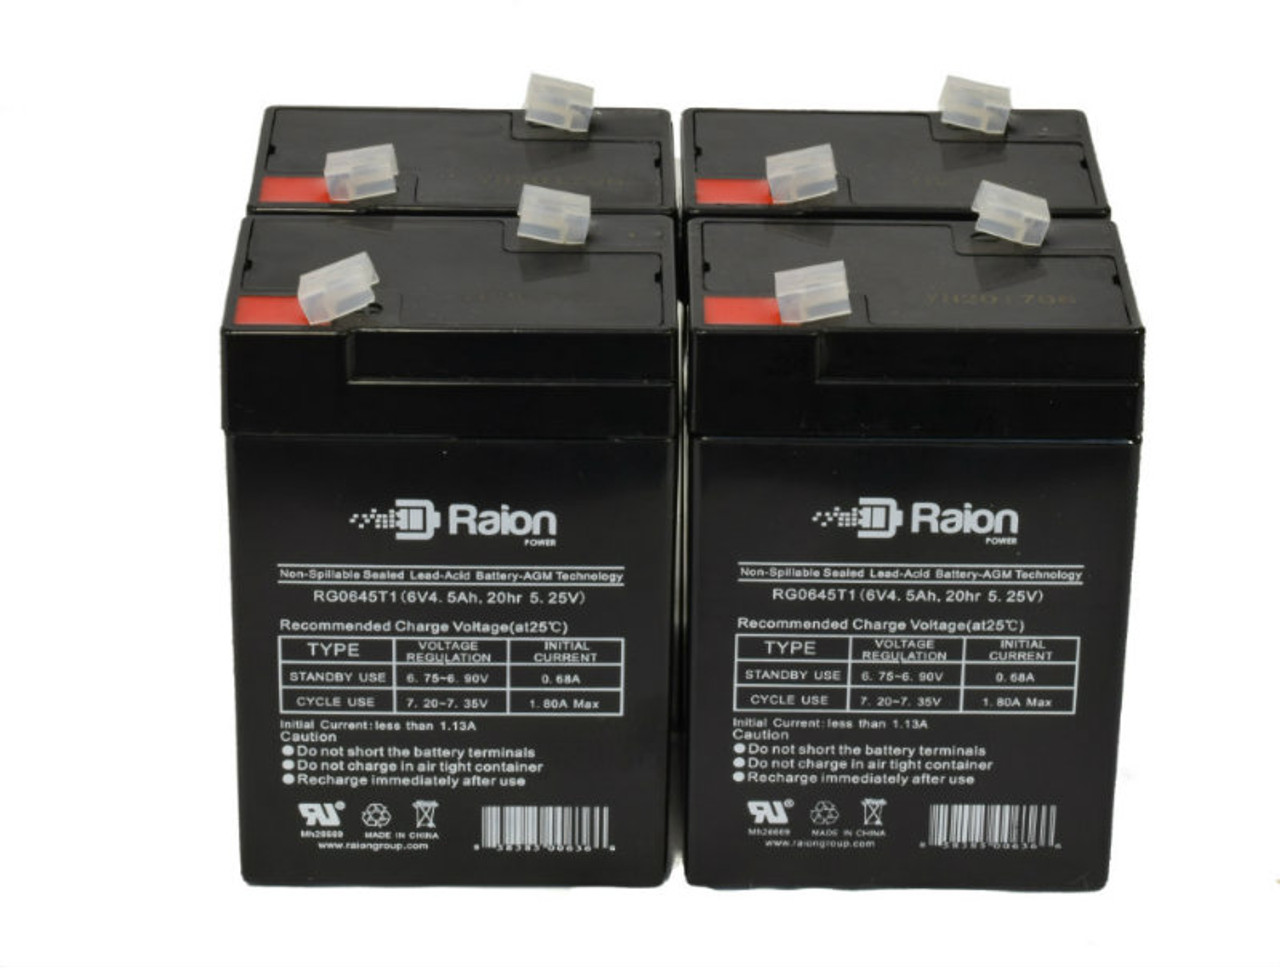 Raion Power RG0645T1 6V 4.5Ah Replacement Medical Equipment Battery for Baxter Healthcare 522 MICROATE Infusion Pump - 4 Pack